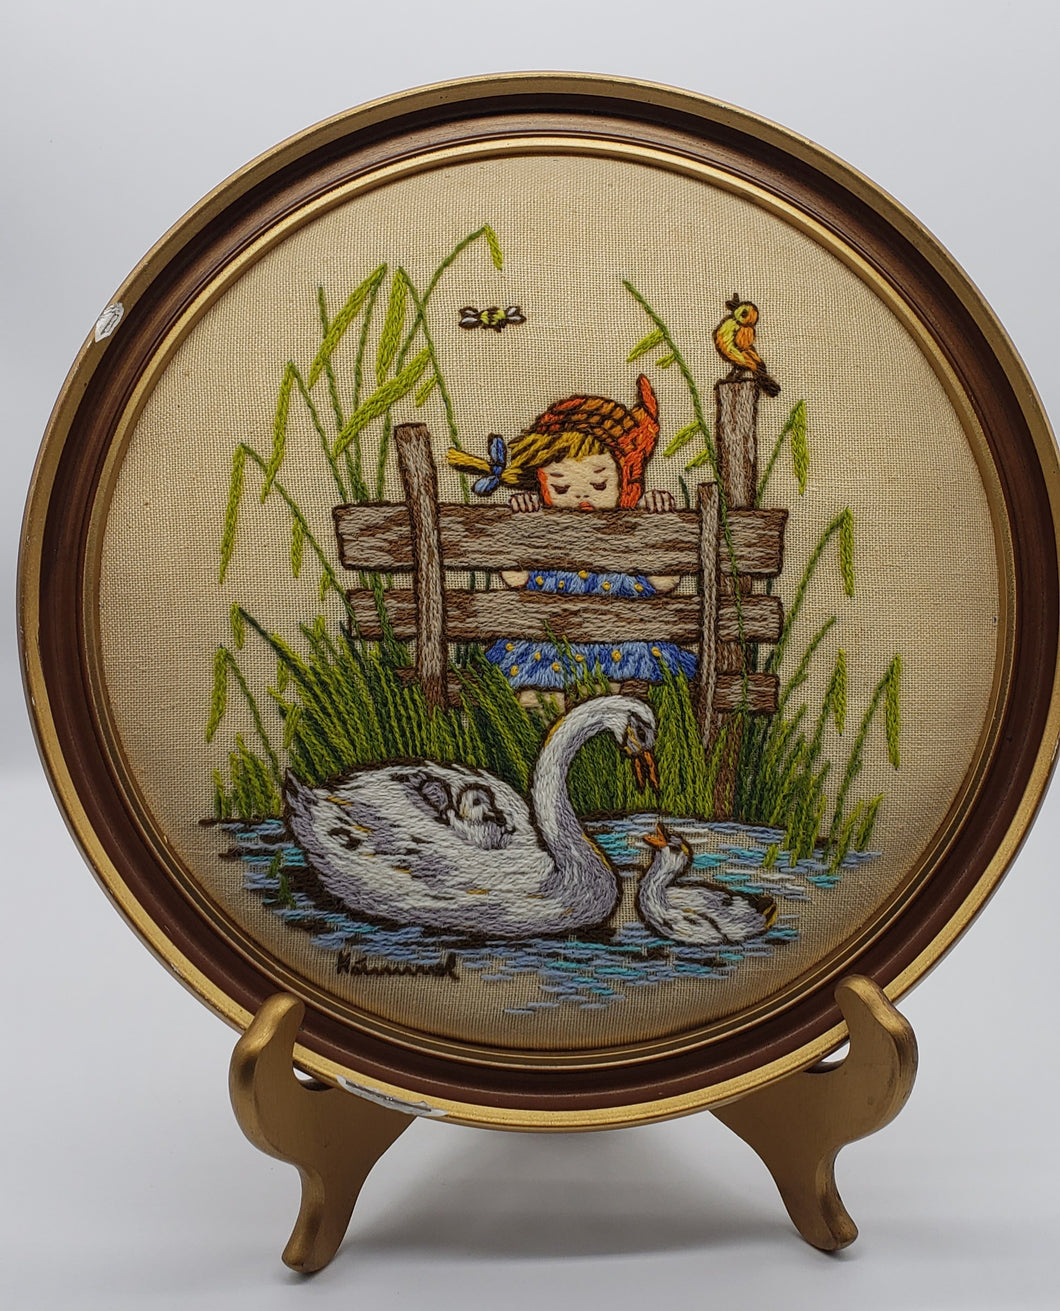 Hummel needlework picture of a Girl looking at a Swan